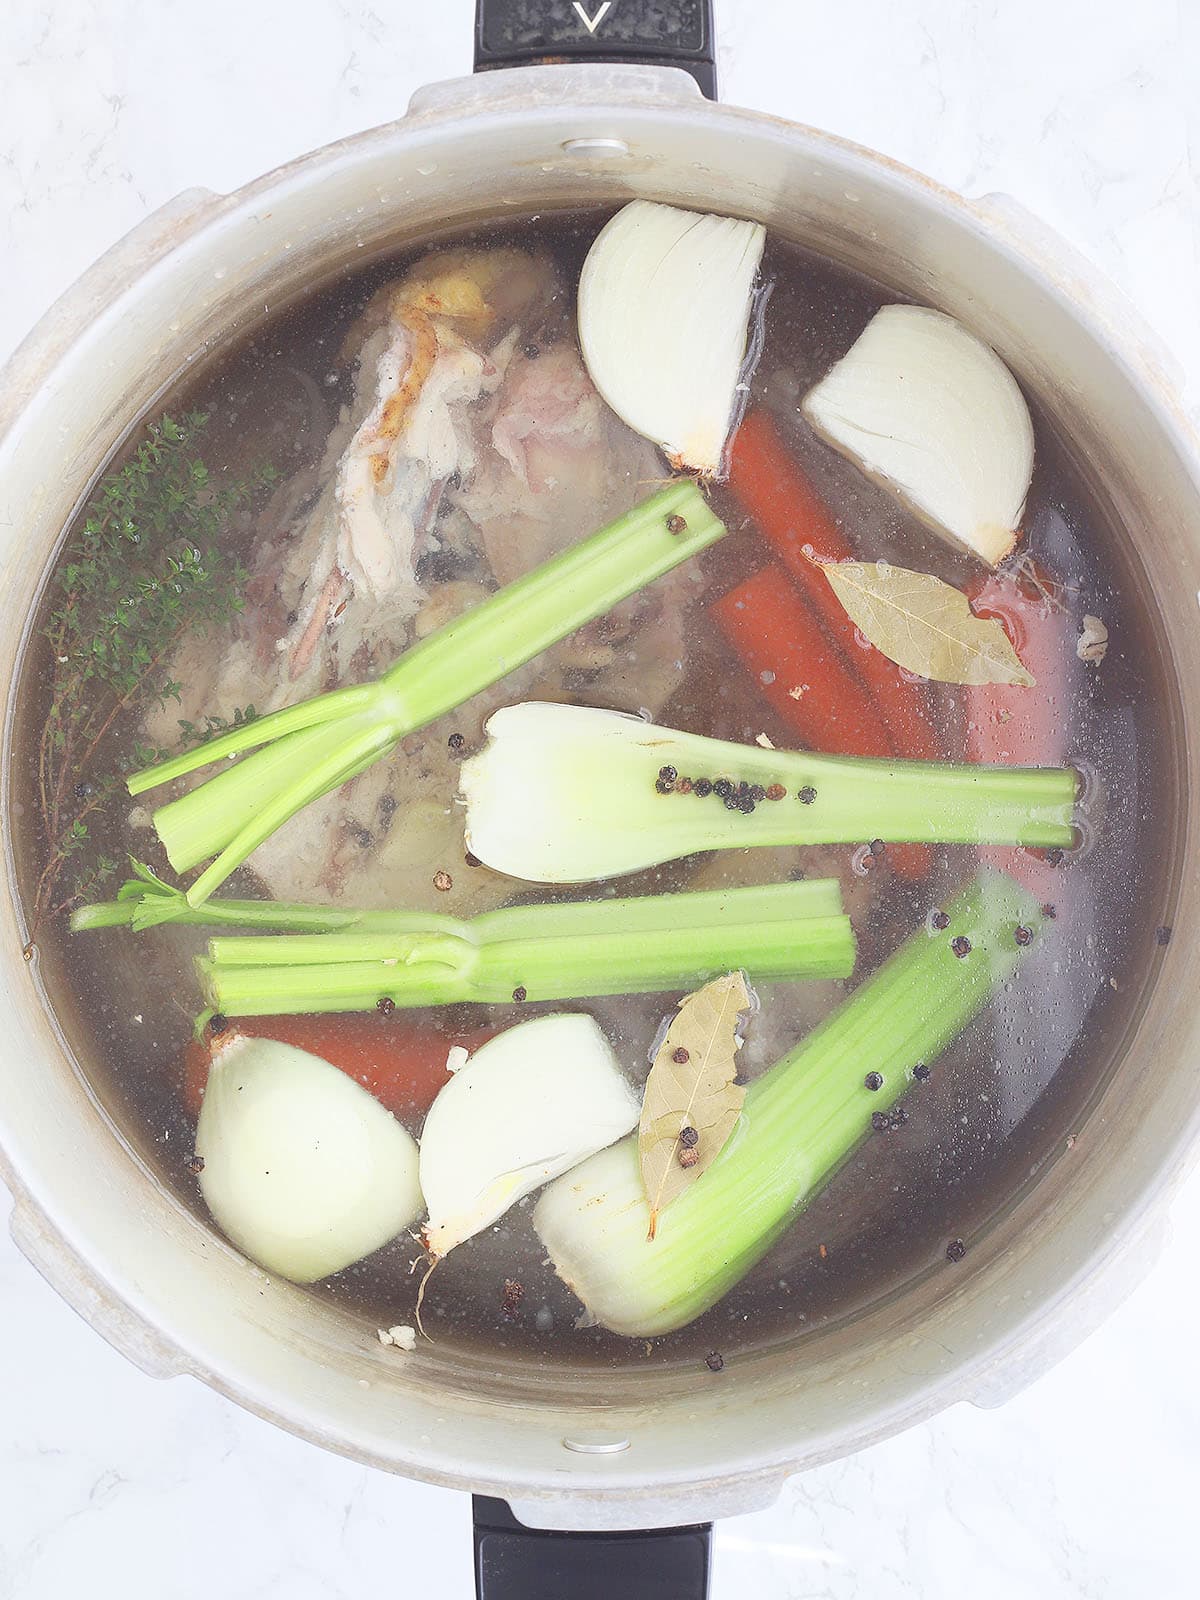 Chicken stock ingredients in a large stock pot before simmering.